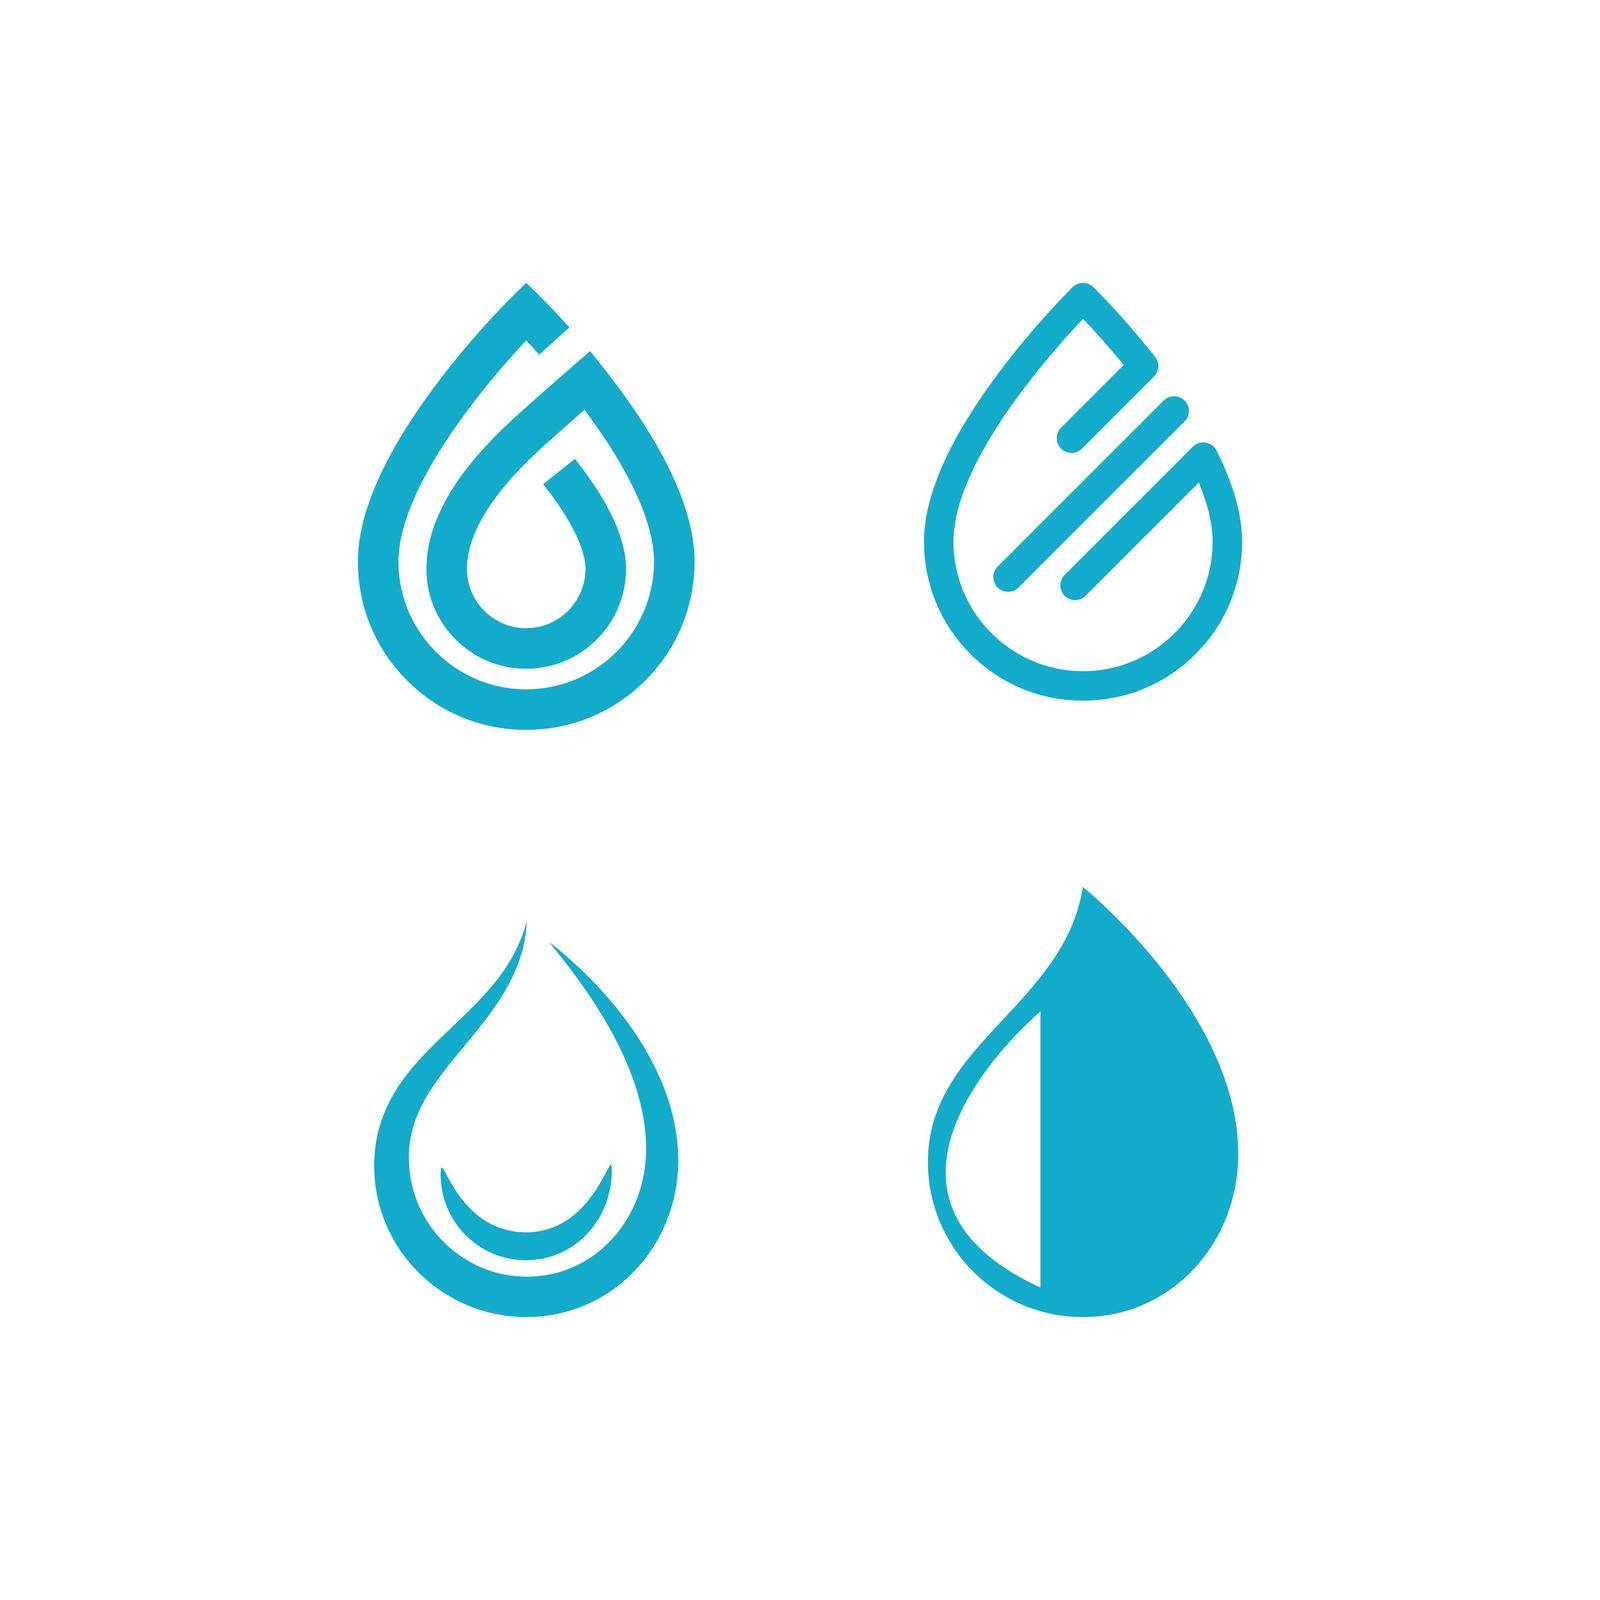 Water drop illustration by awk